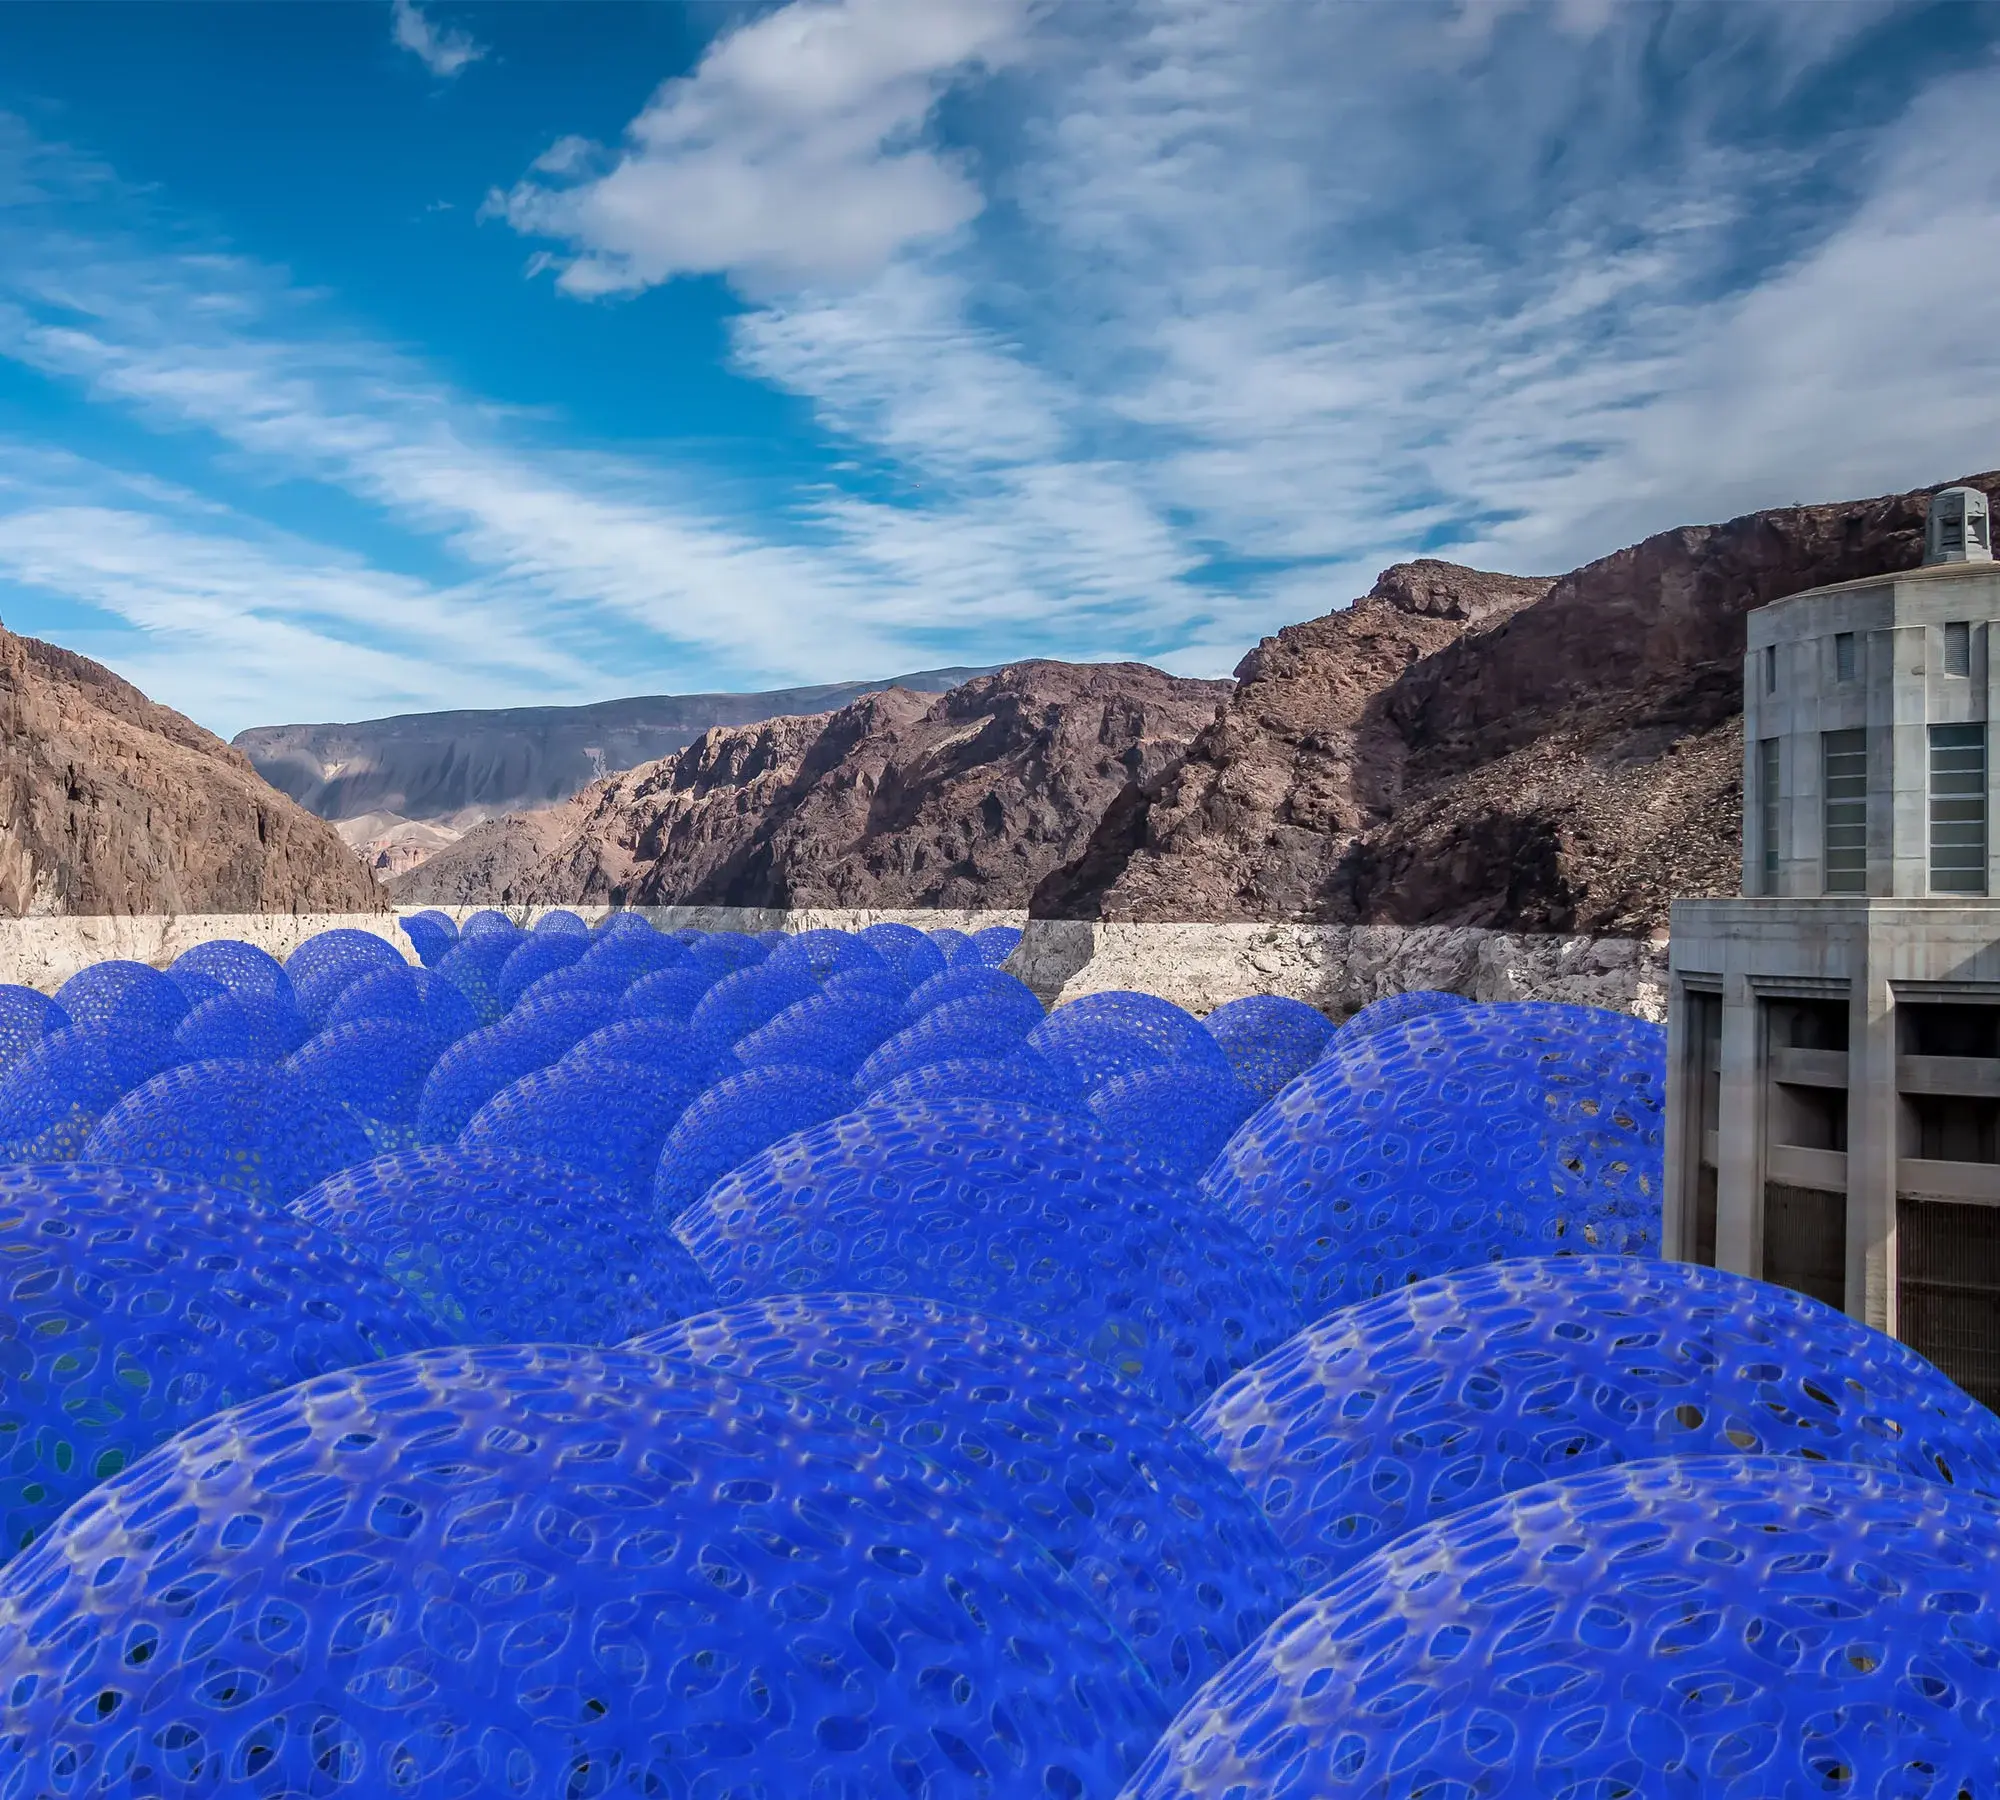 Hoover Dam filled with representative blue CO2 spheres